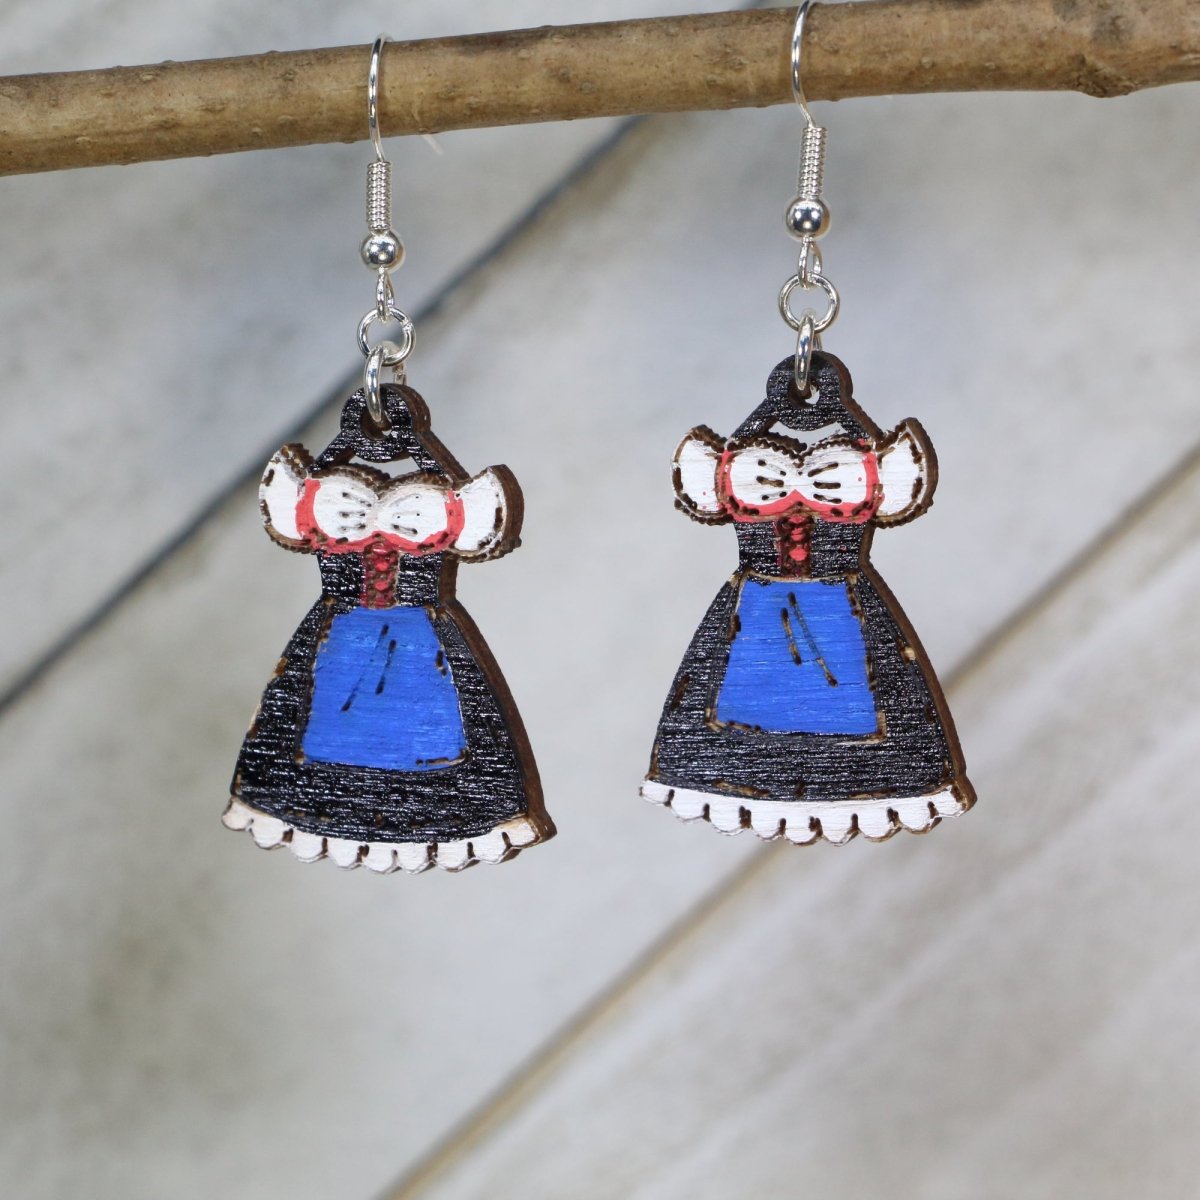 Authentic German Dirndl Dress Inspired Wooden Earrings - Black and Blue - Cate's Concepts, LLC